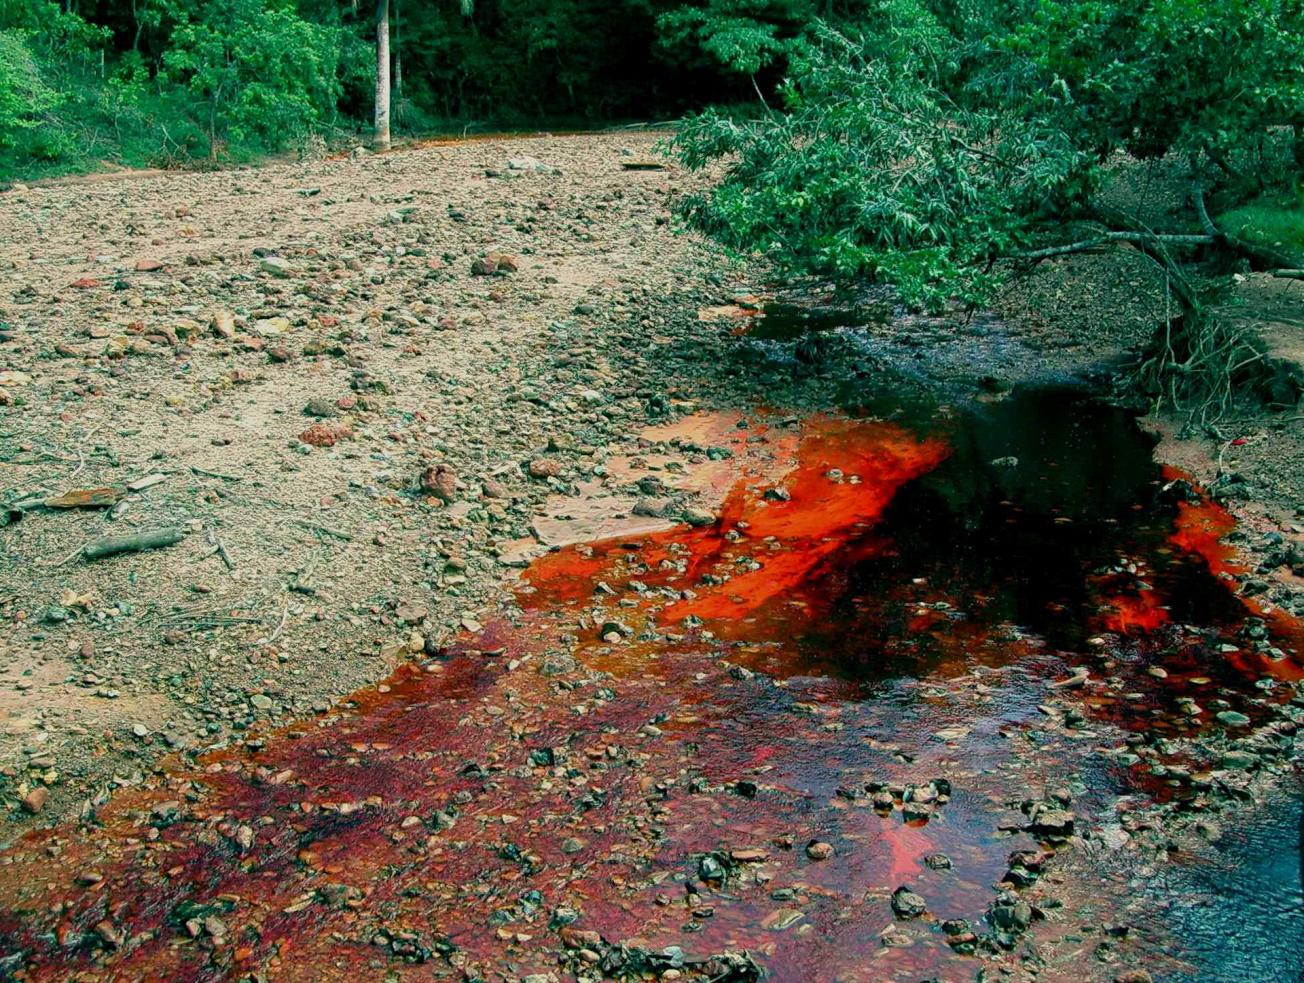 The Rio de Sangre in the Dominican Republic is contaminated by acid run-off from a mine 